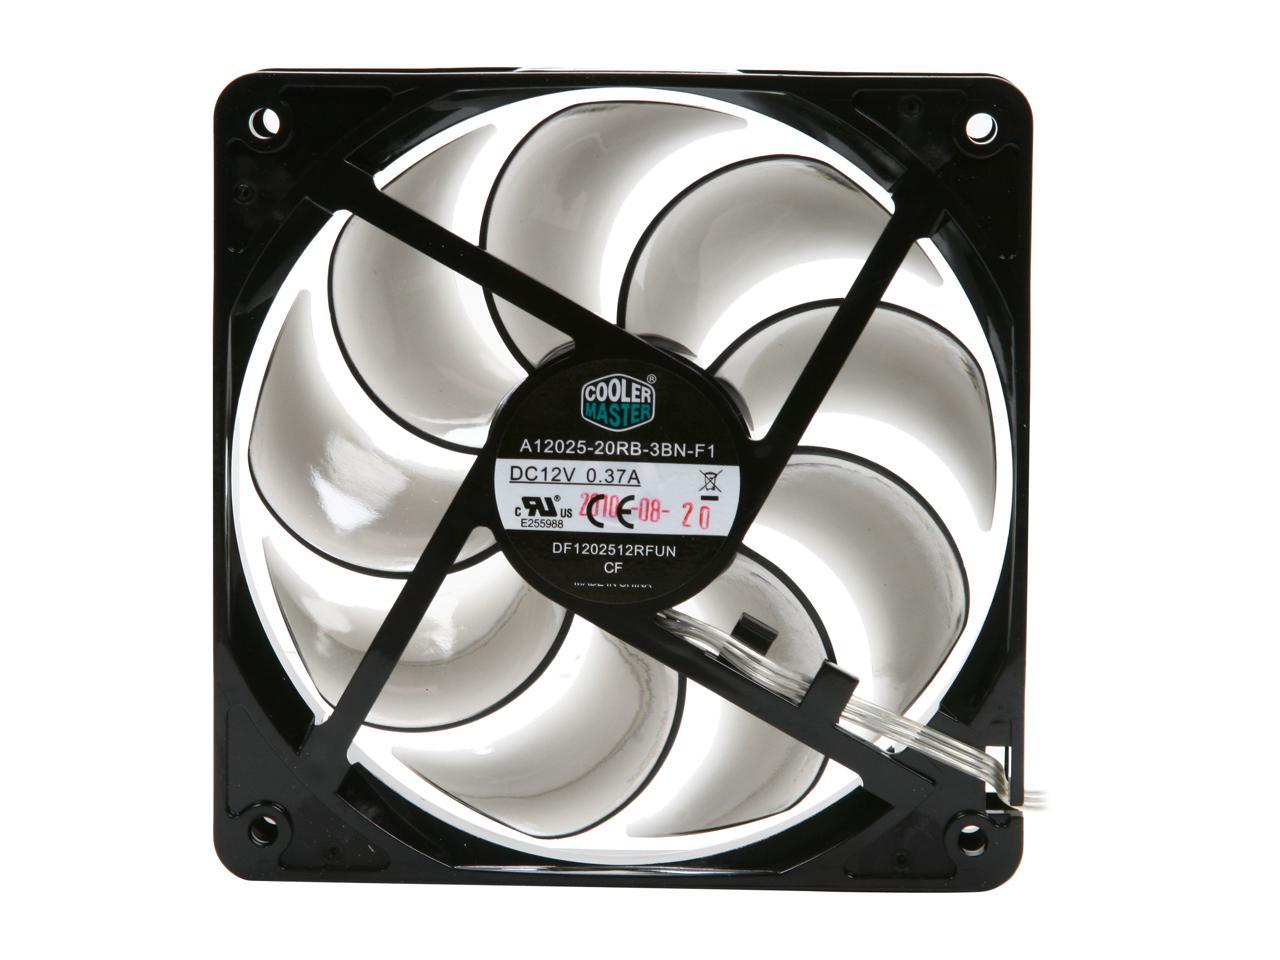 Cooler Master SickleFlow 120 - Sleeve Bearing 120mm Red LED Silent Fan for Computer Cases, CPU Coolers, and Radiators